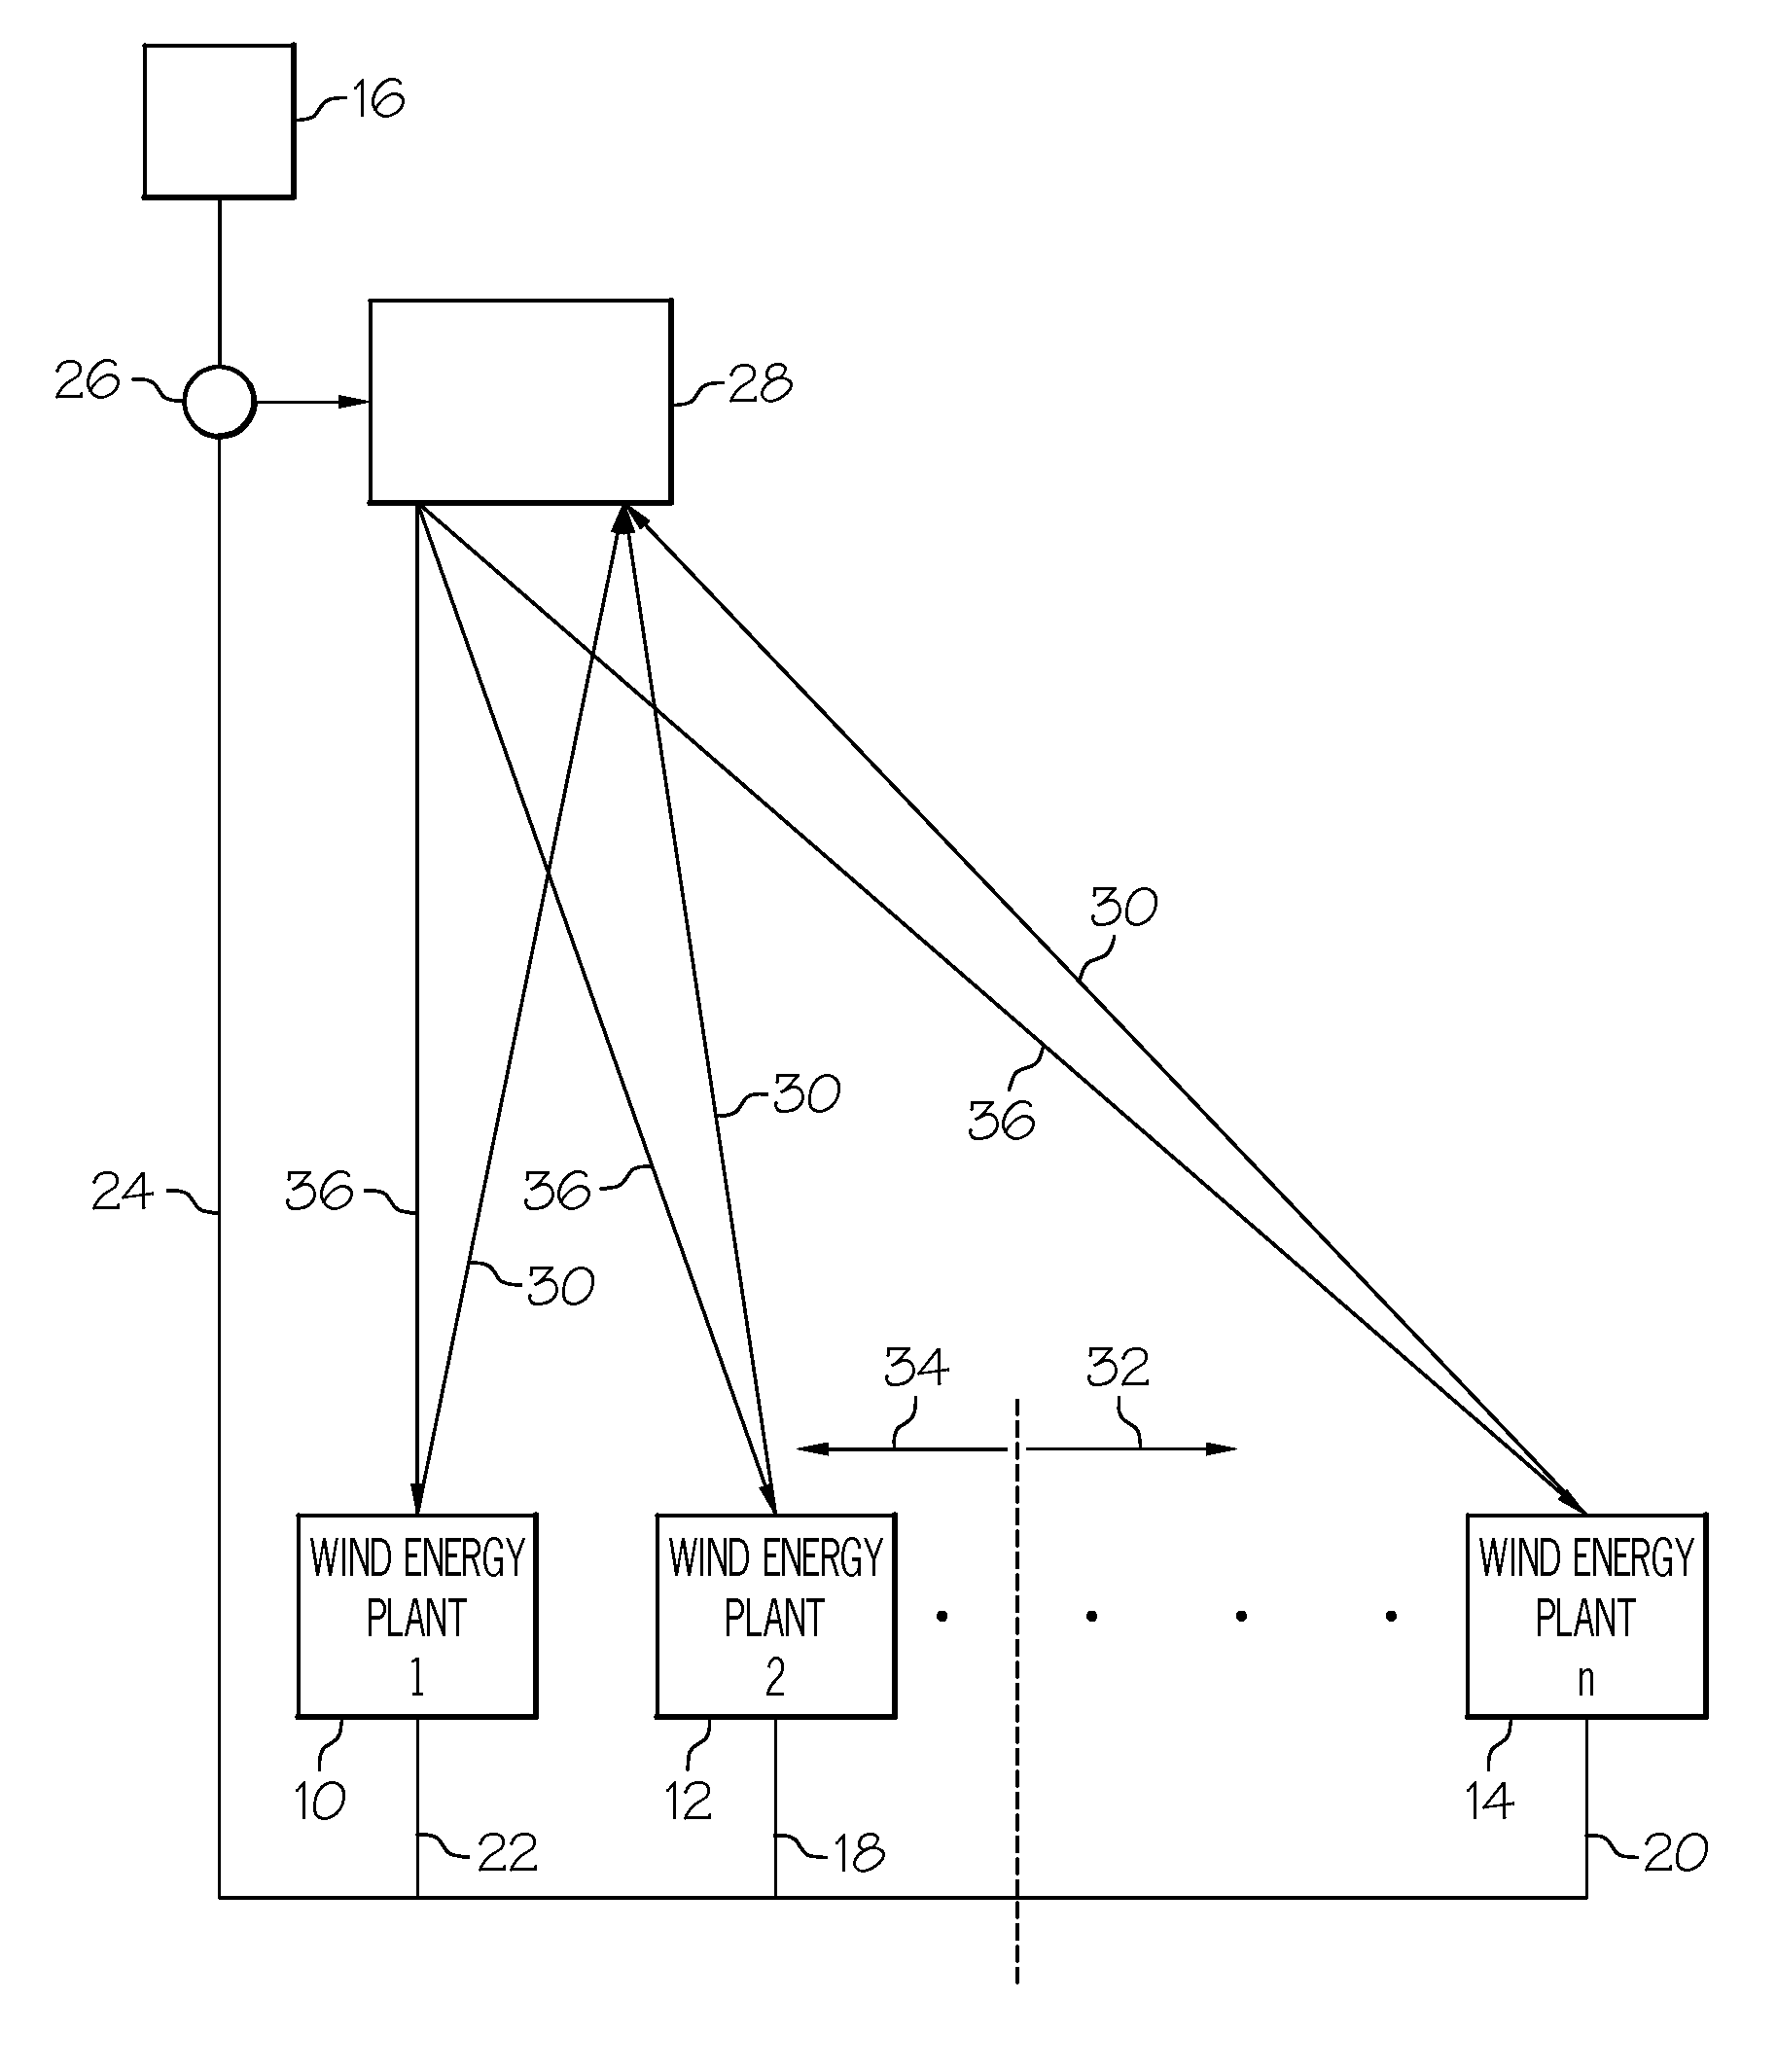 Wind park and method for the operation of a wind park